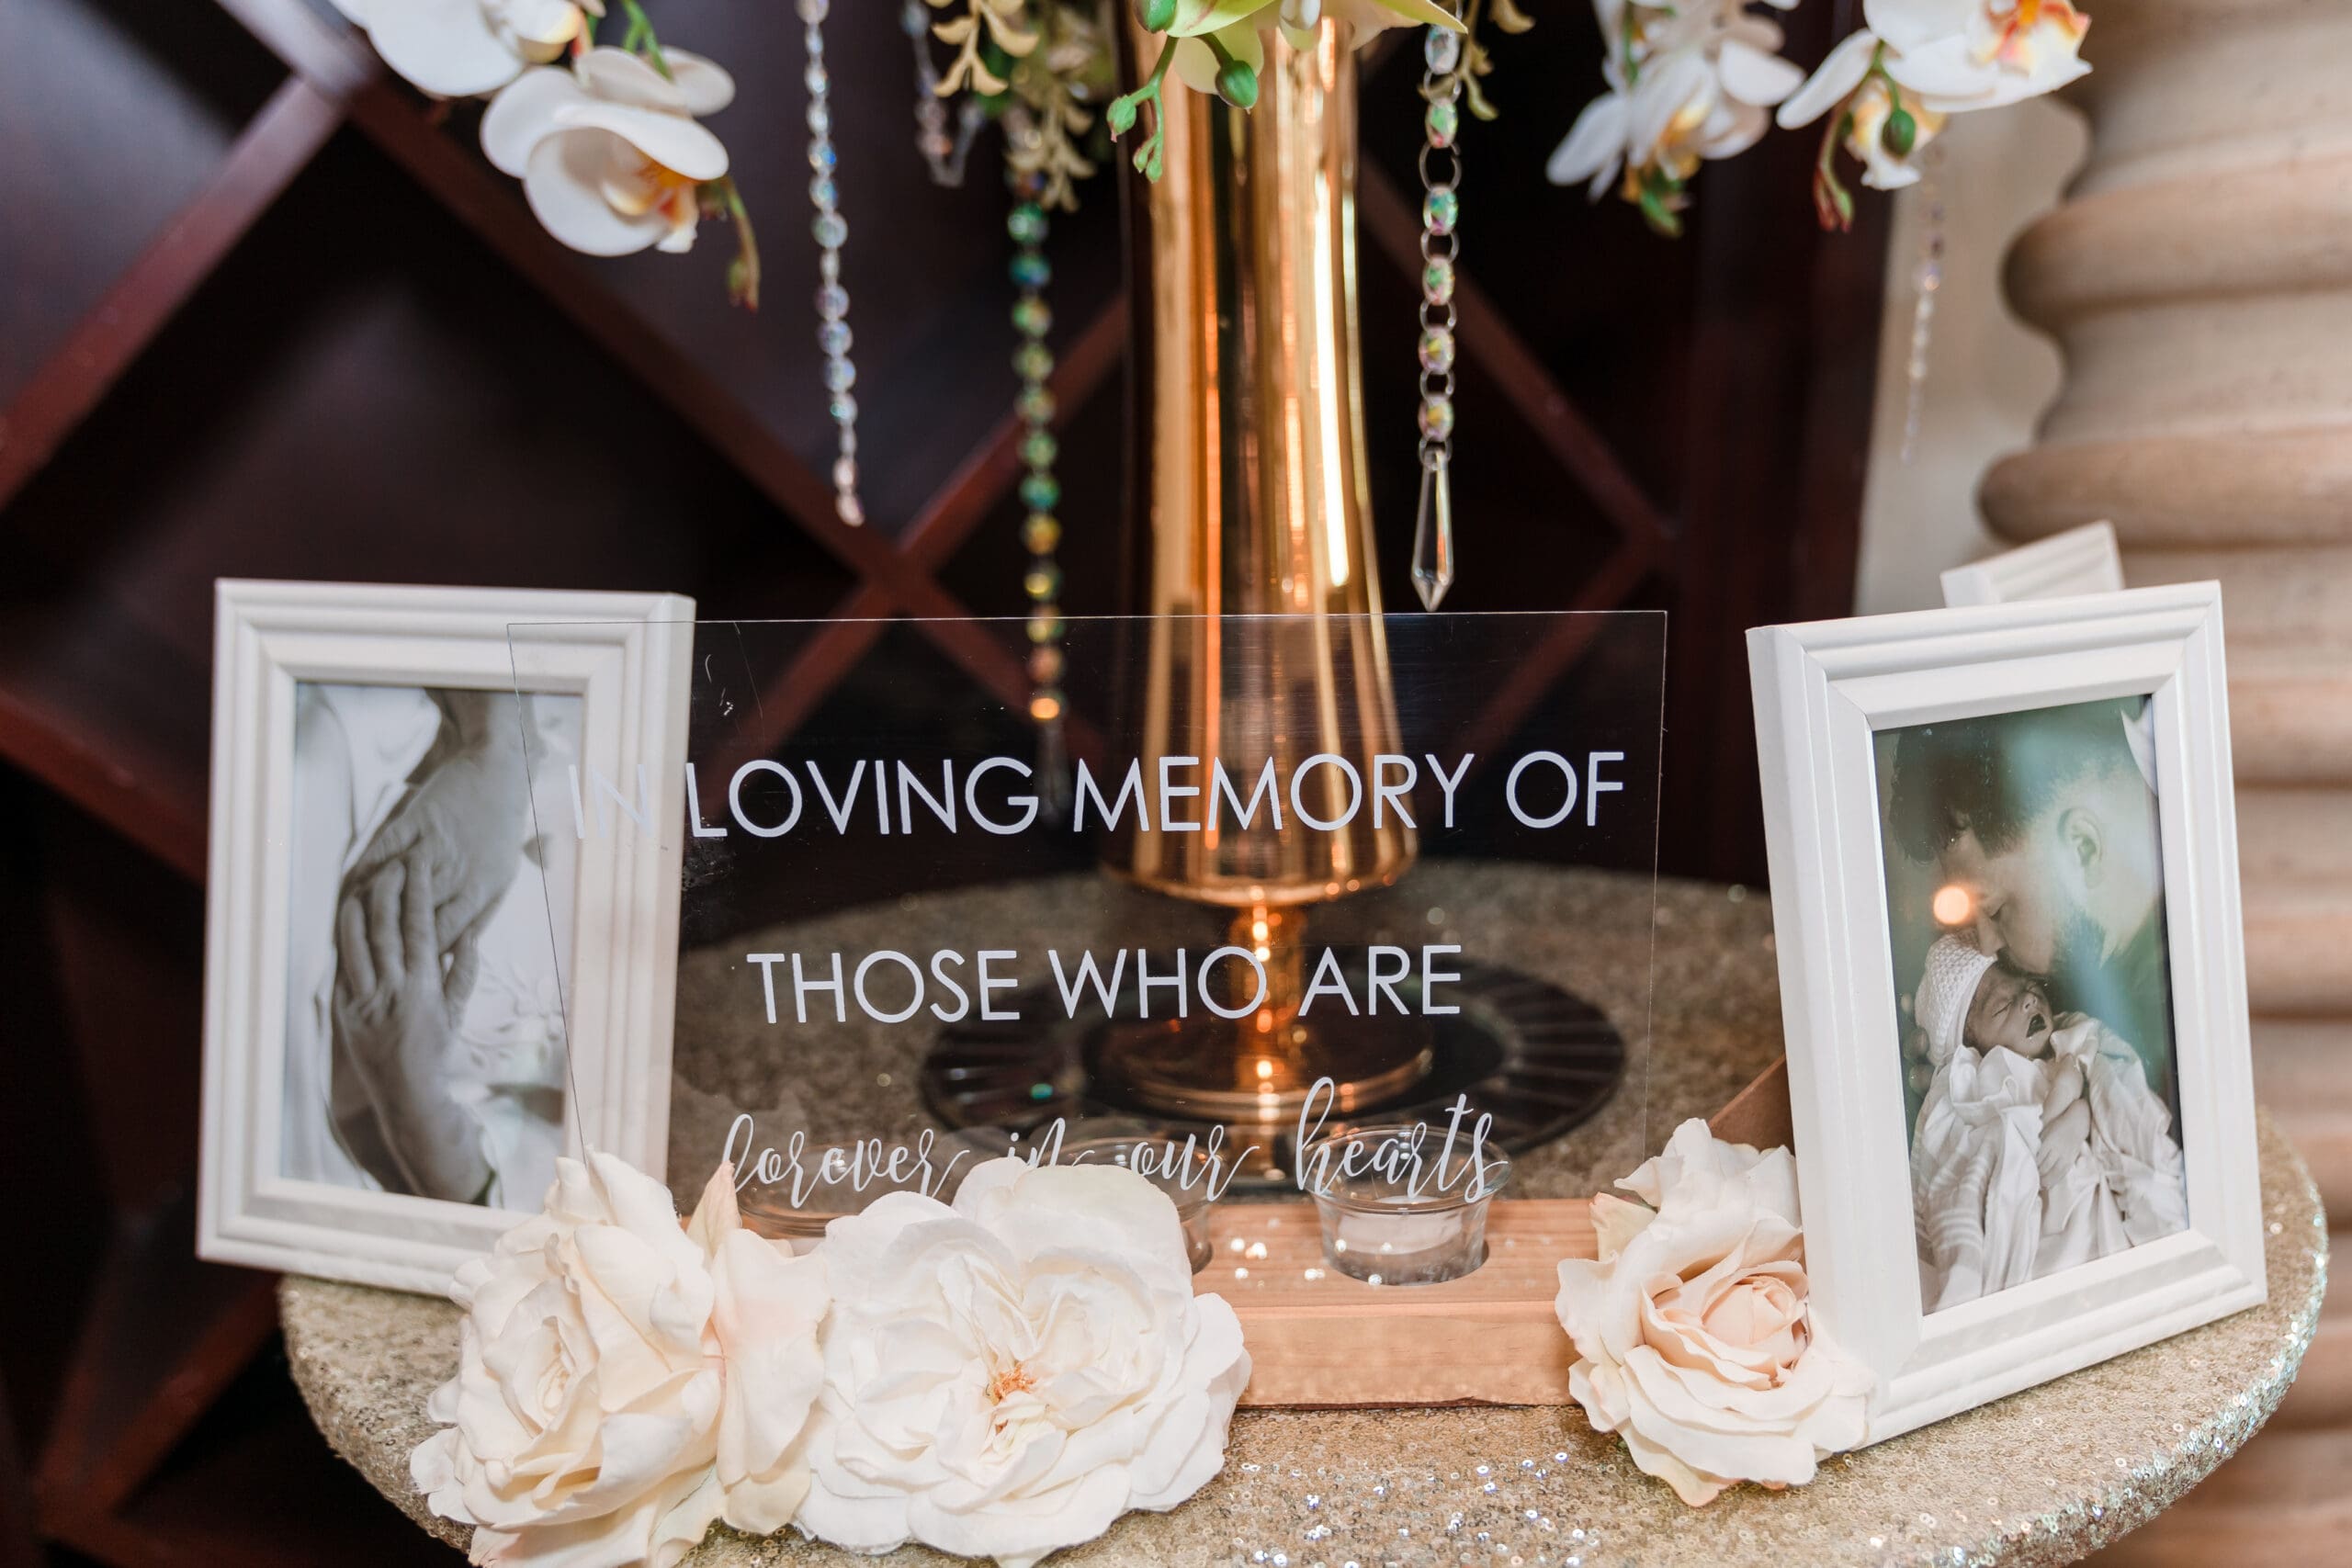 Close-up of flowers and photos with the words "In Loving Memory Of Those Who Are Here in our hearts" at Jenn and Jazer's wedding.